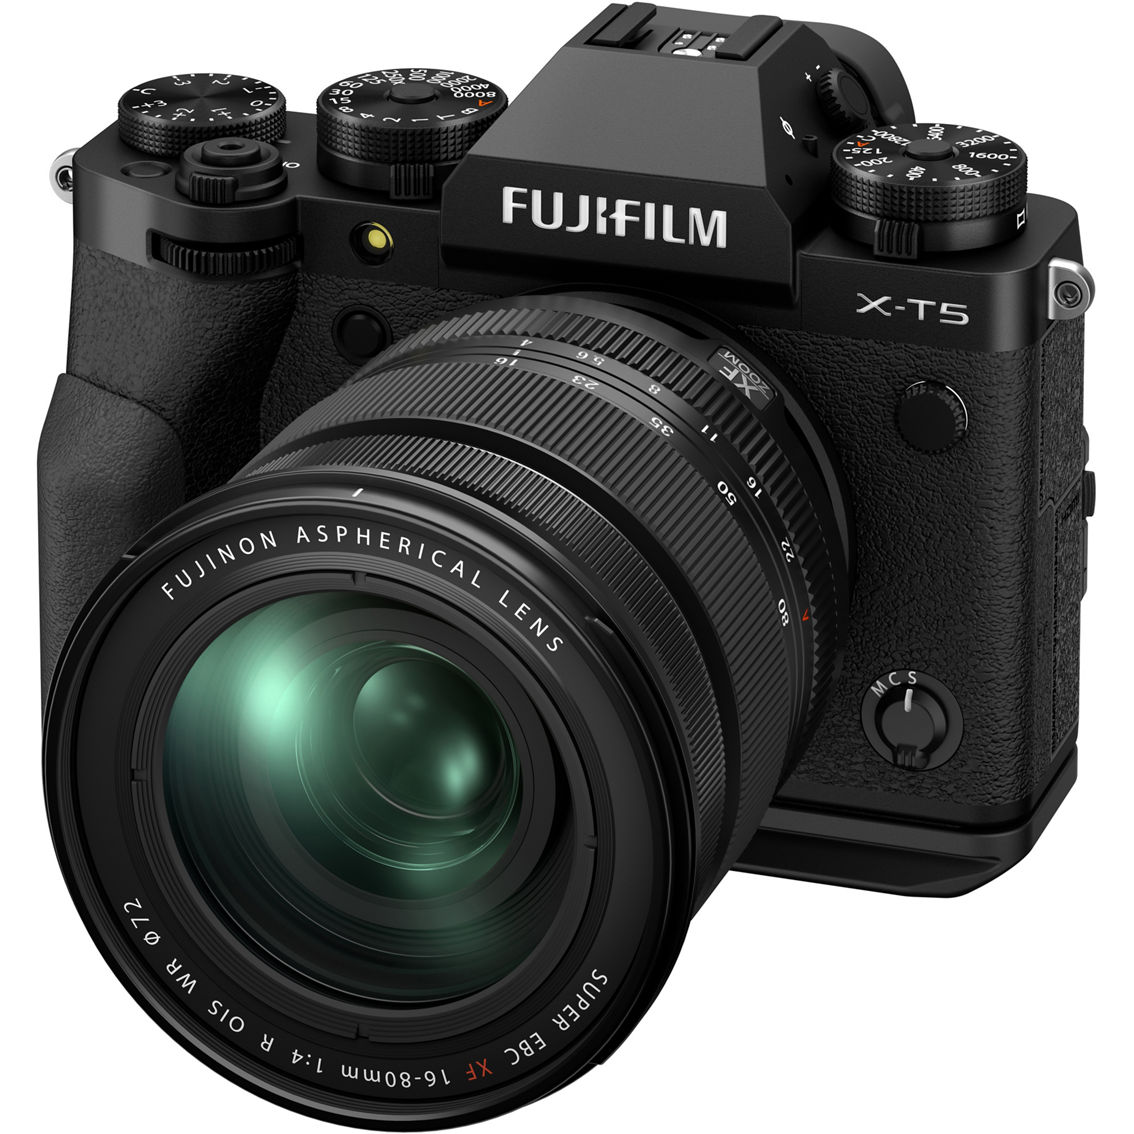 FujiFilm X-T5 Mirrorless Camera Body with XF16-80mmF4 R OIS WR Lens Kit - Image 6 of 10